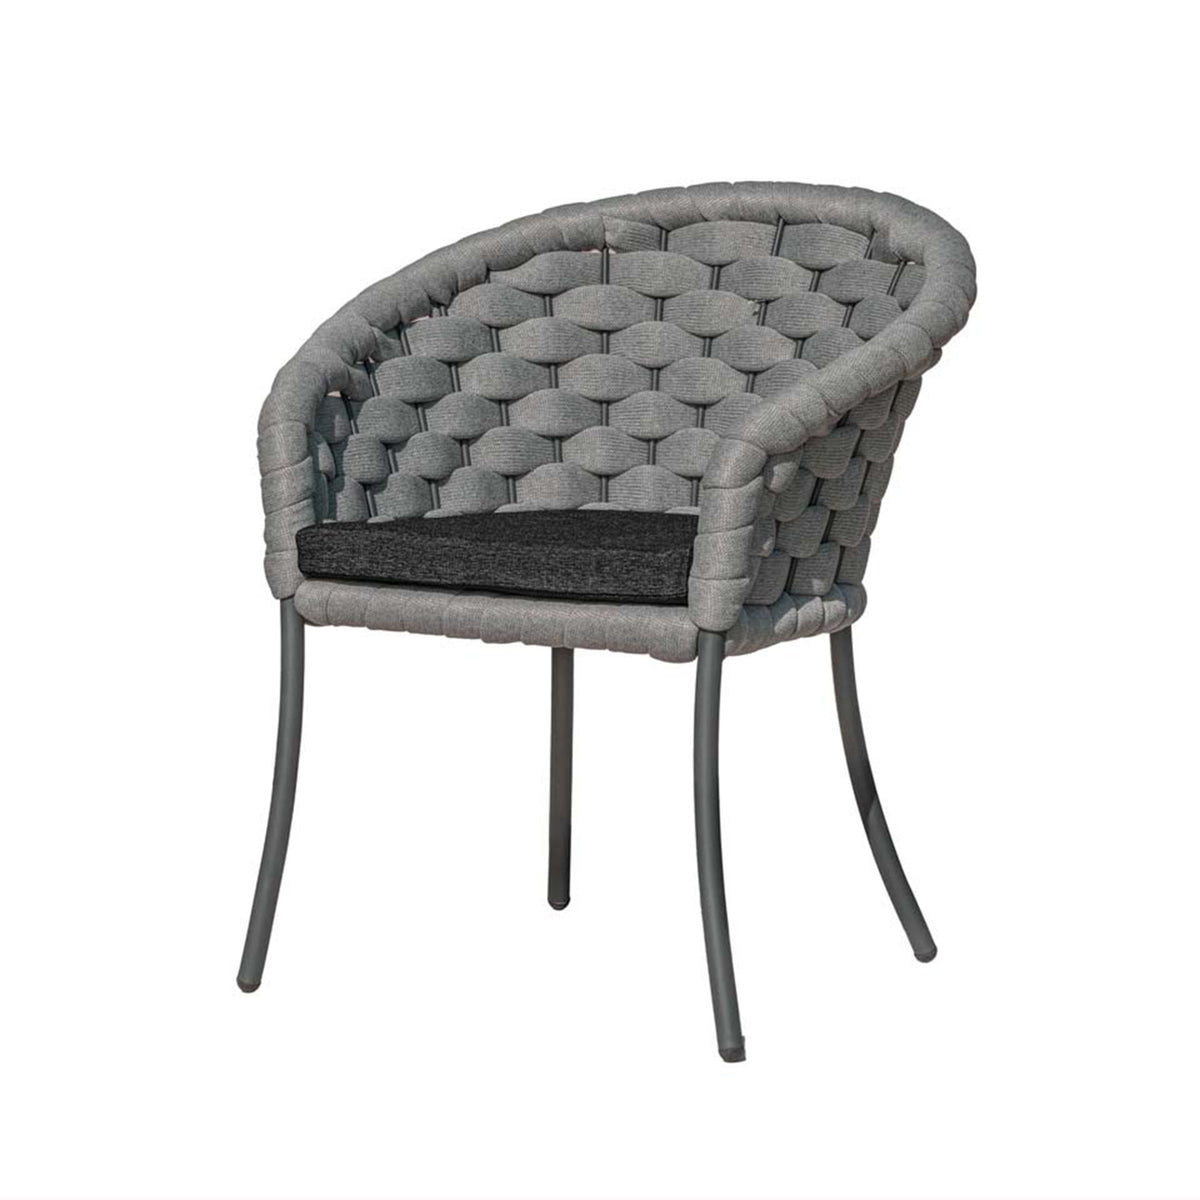 Alexander Rose Light Grey Cordial Luxe Outdoor Dining Chair with Cushion